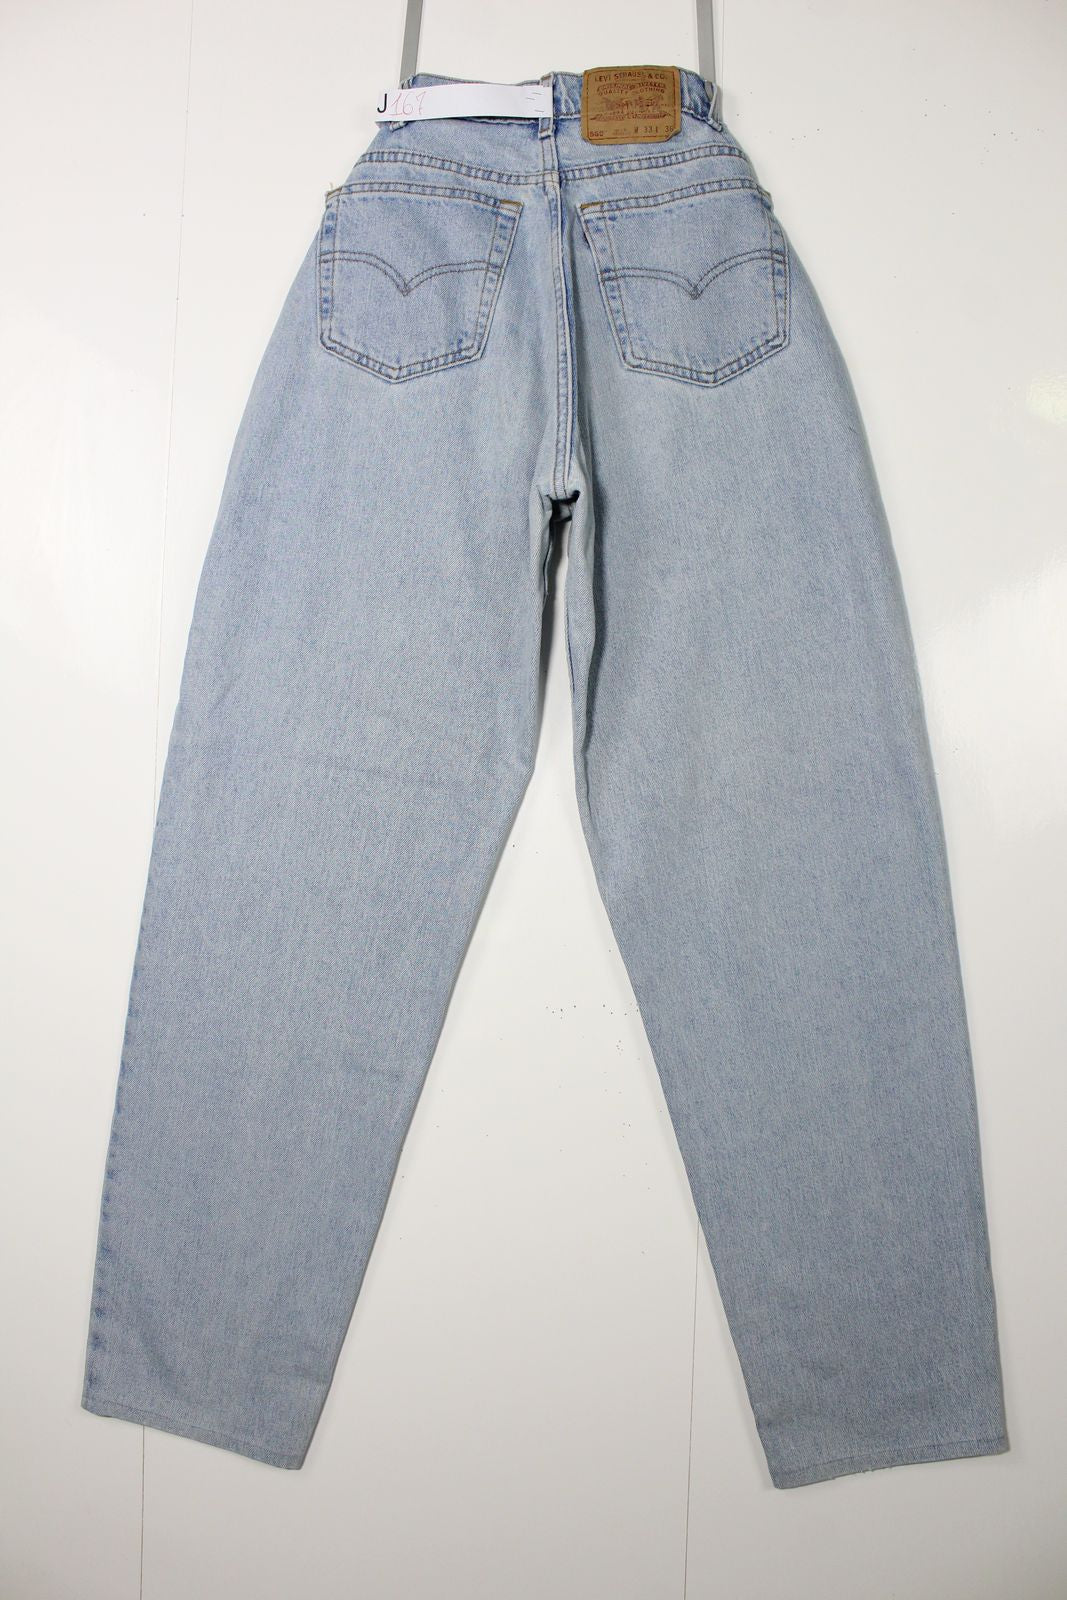 Levi's 560 Loose Fit Denim W33 L36 Made In USA Jeans Vintage